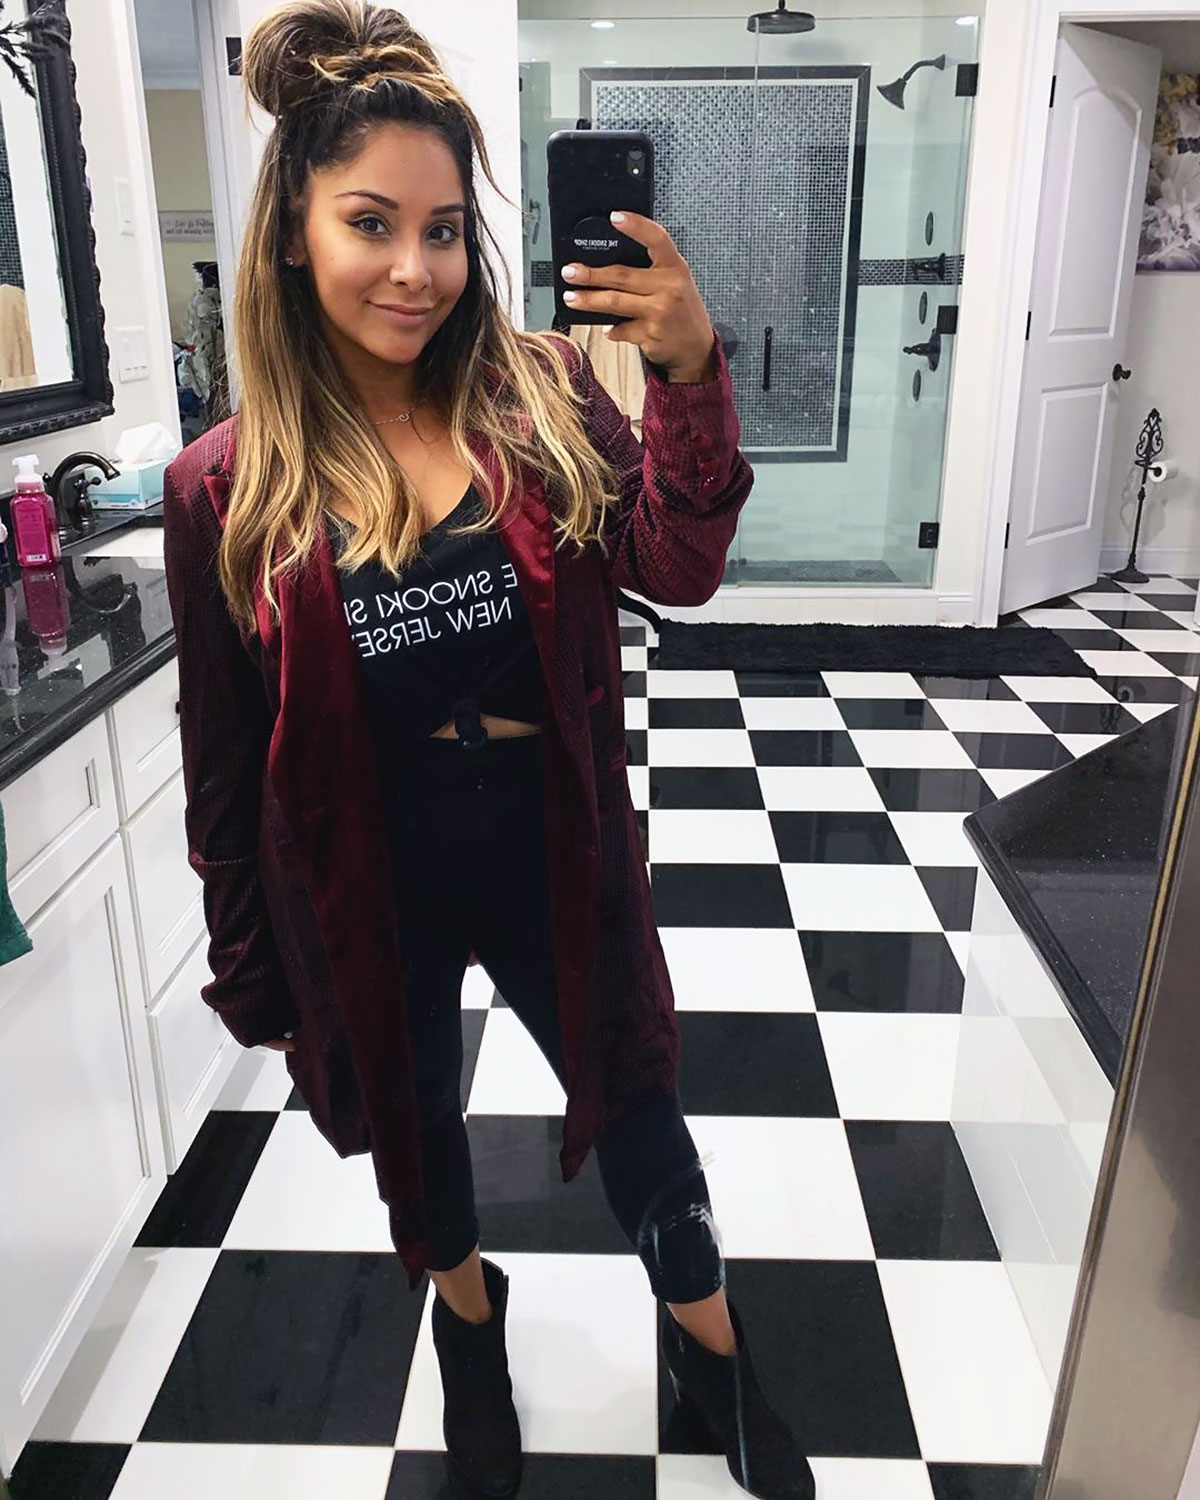 See the Stars' At-Home Style - Nicole "Snooki" Polizzi